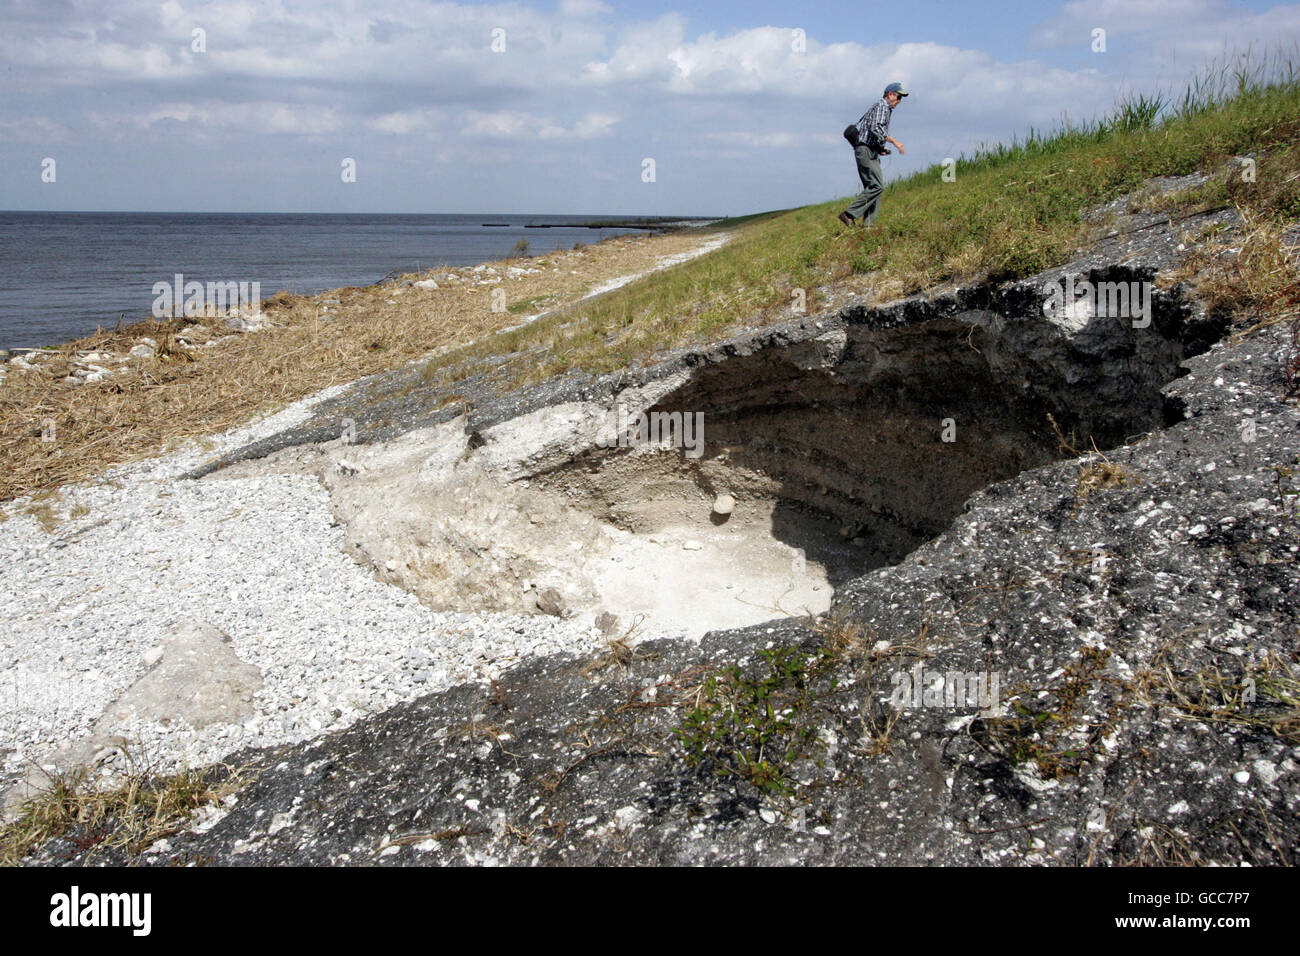 Florida, USA. 8th July, 2016. Wayne Nelson of Okeechobee surveys the damage done to the Herbert Hoover dike surrounding Lake Okeechobee by hurricane Wilma on October 30, 2005. Portions of dike south of Pahokee were washed away by wave action during hurricane Wilma. © Allen Eyestone/The Palm Beach Post/ZUMA Wire/Alamy Live News Stock Photo